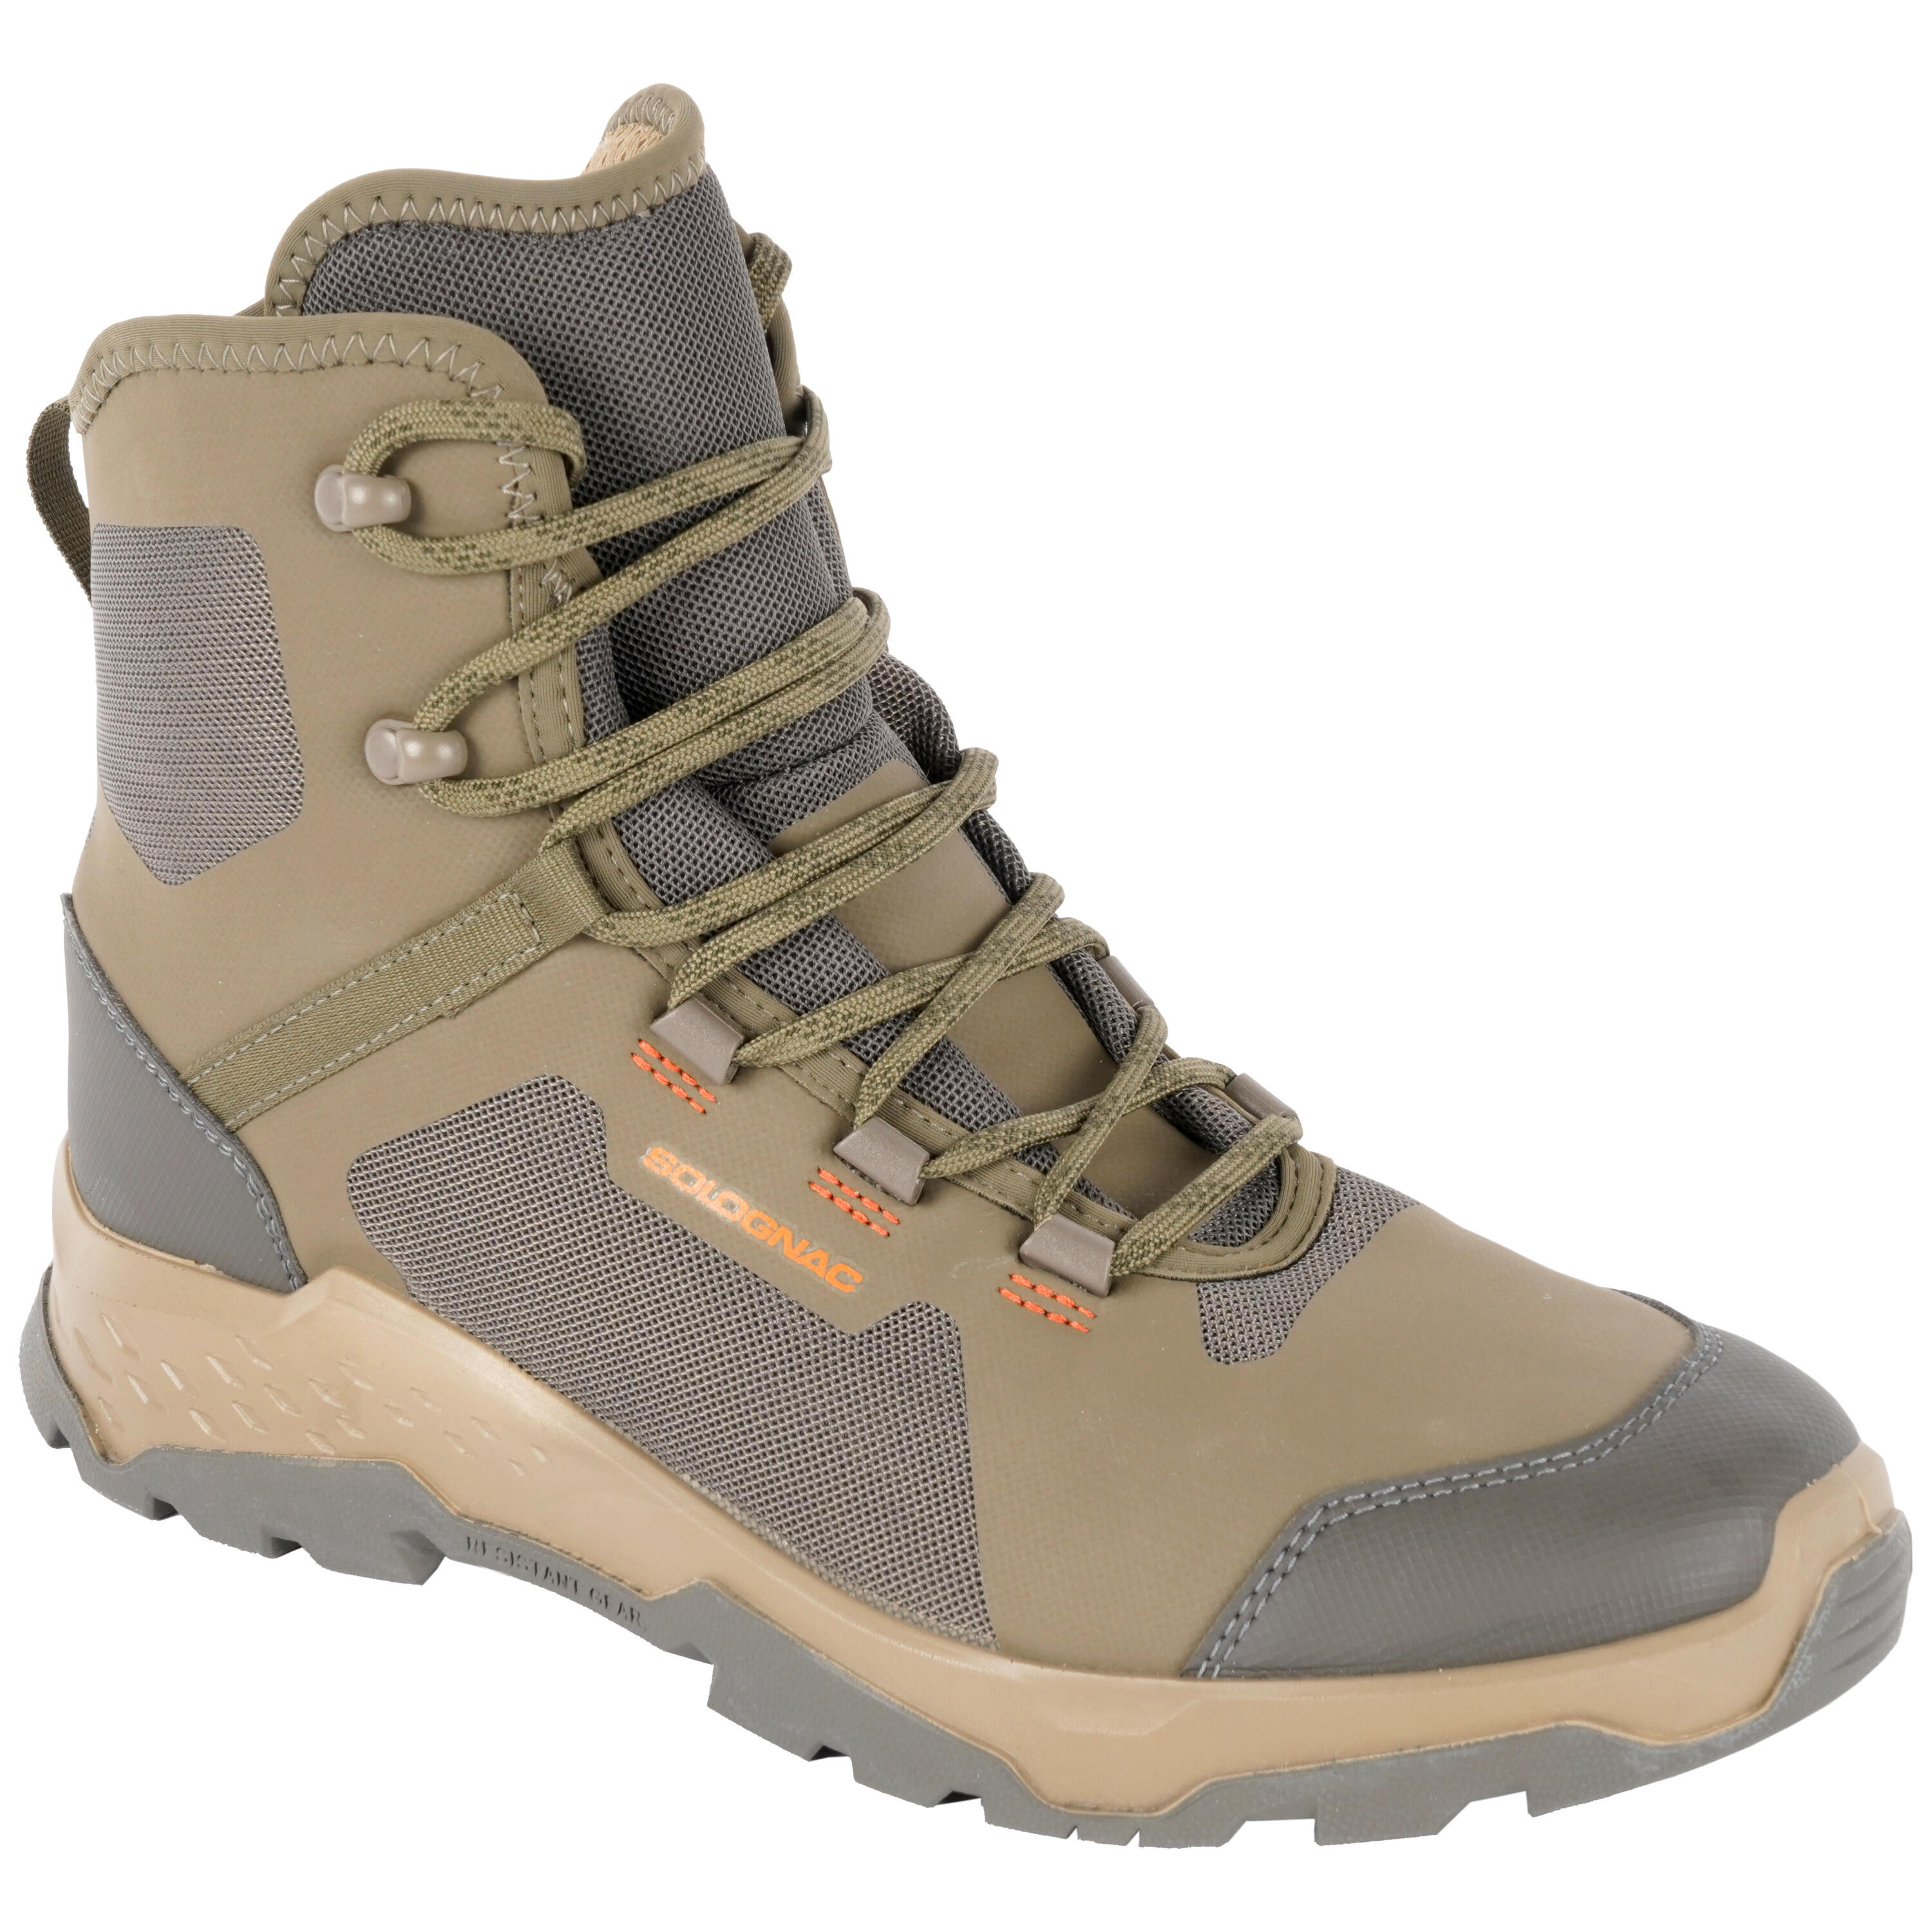 Silent Breathable Boots - Brown 1/9